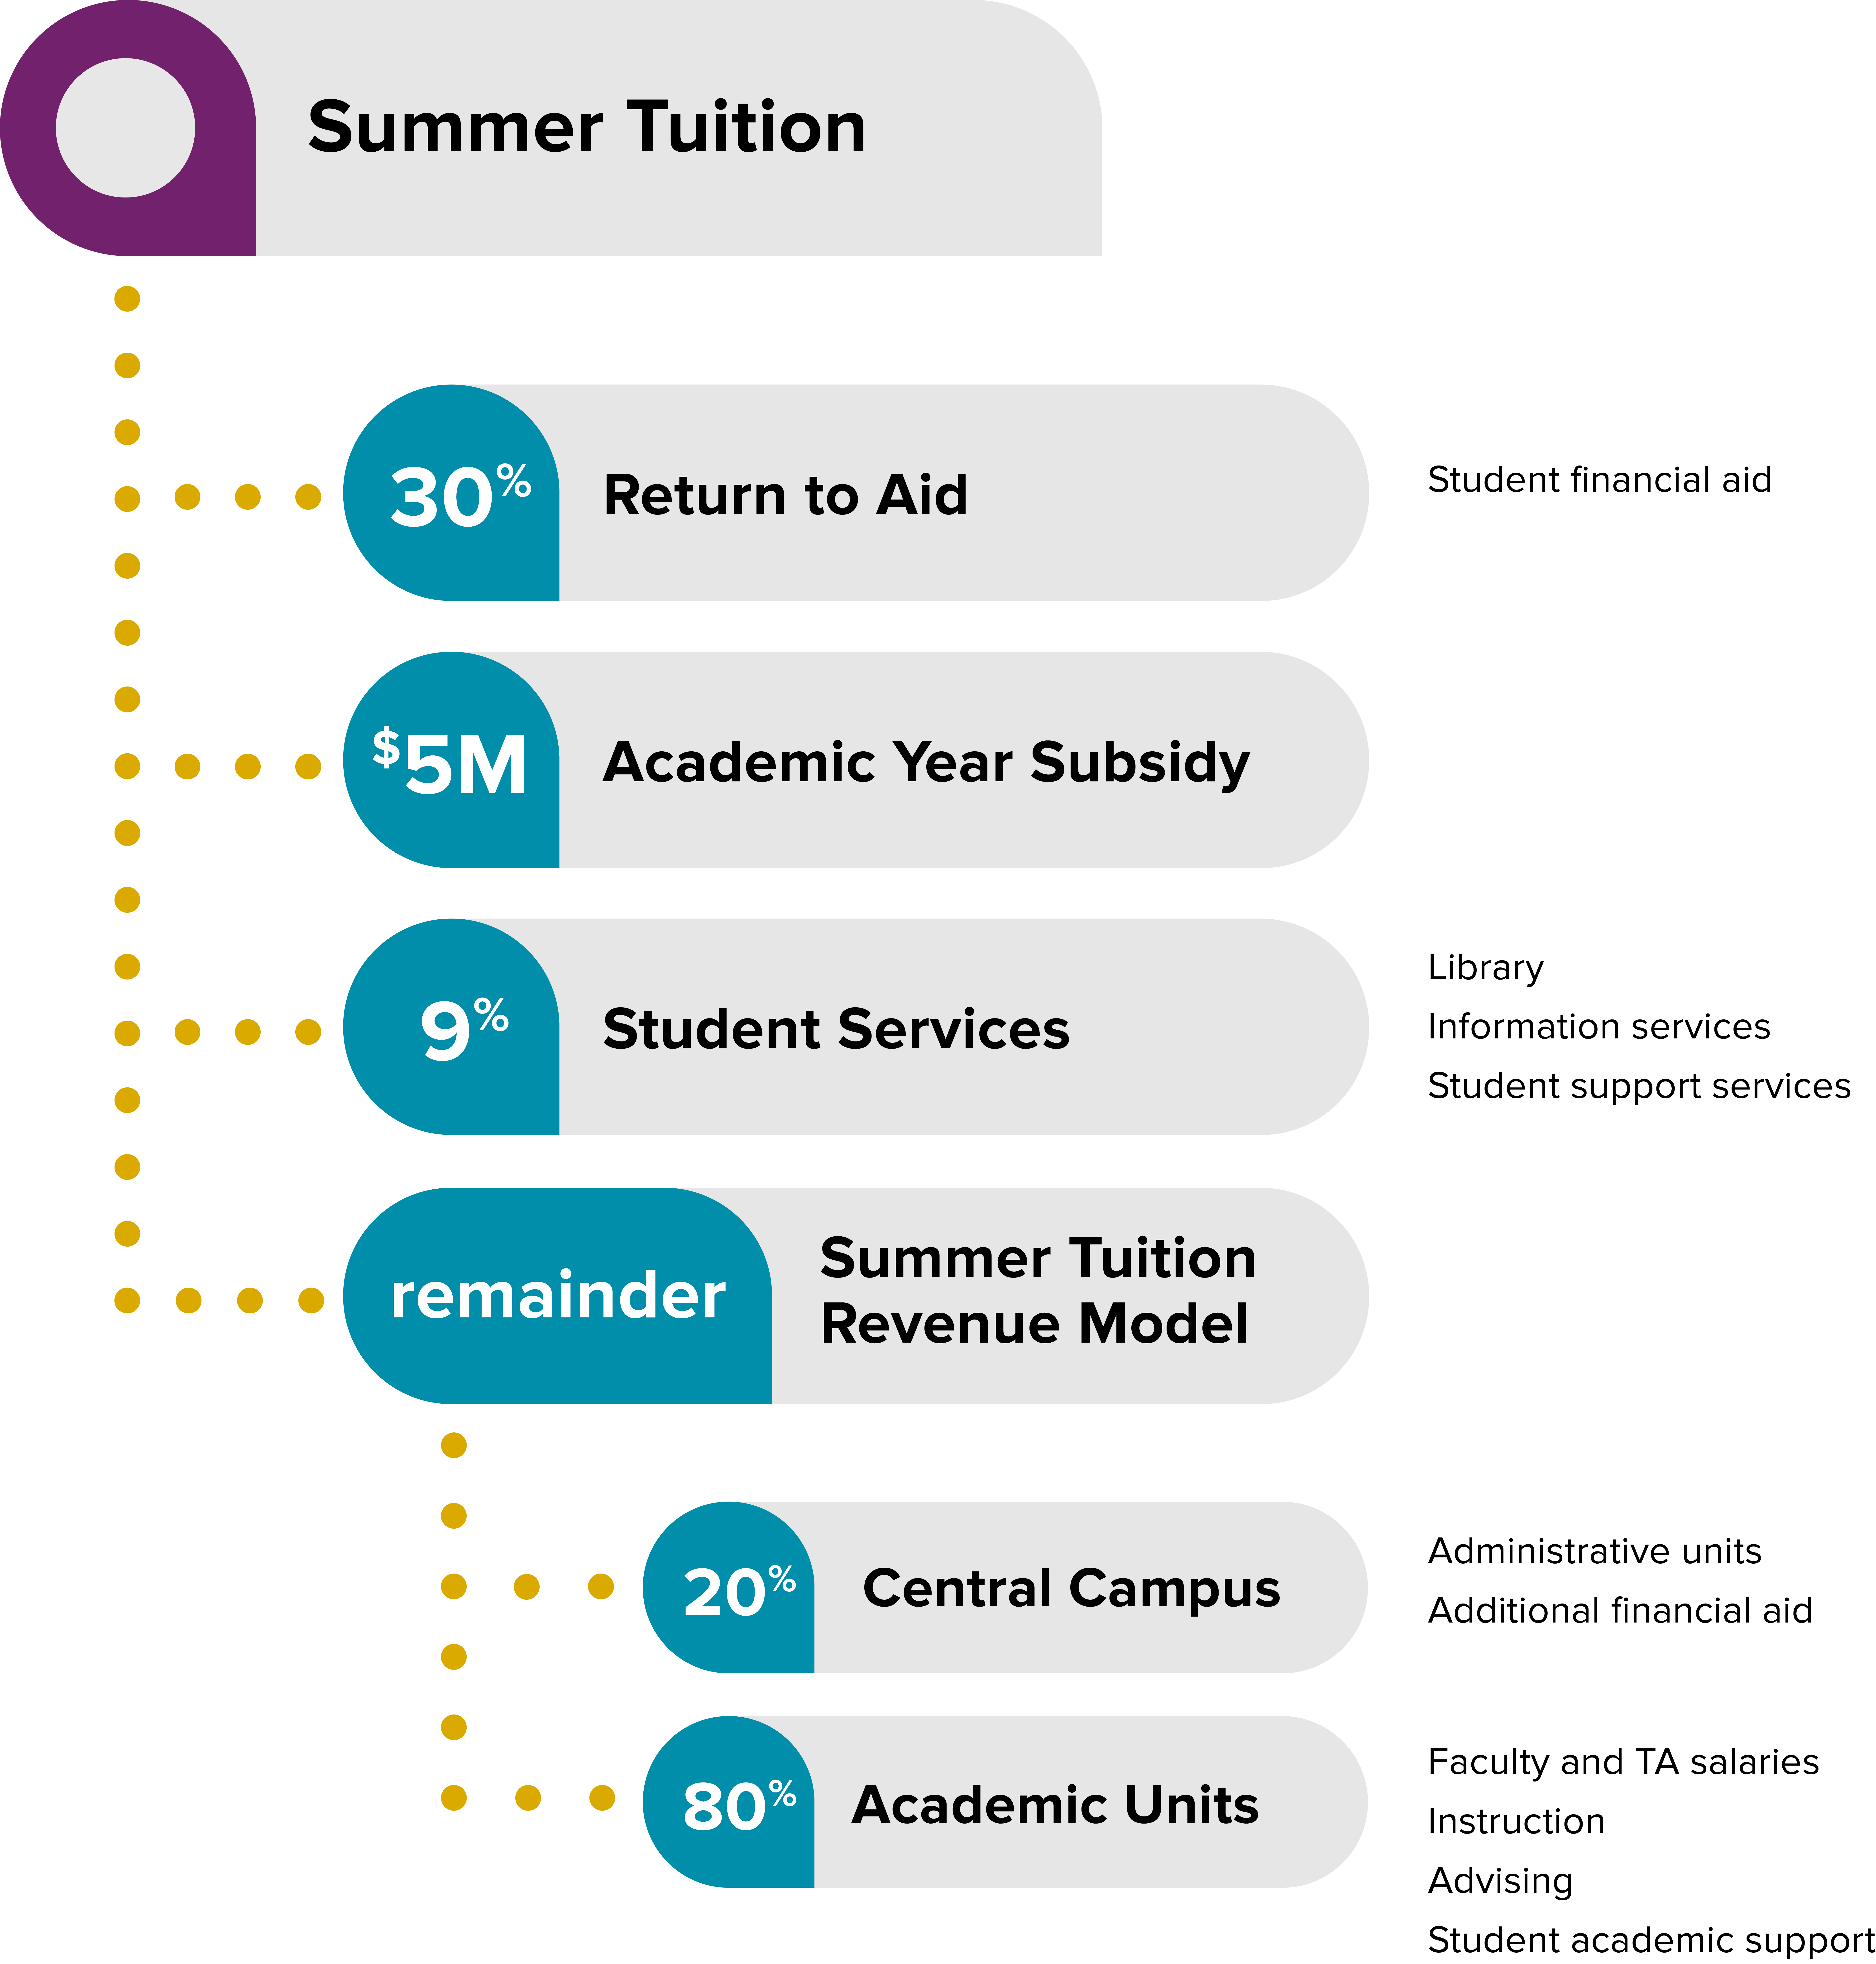 Diagram for incentive-based budget model for summer tuition, as described on the webpage.